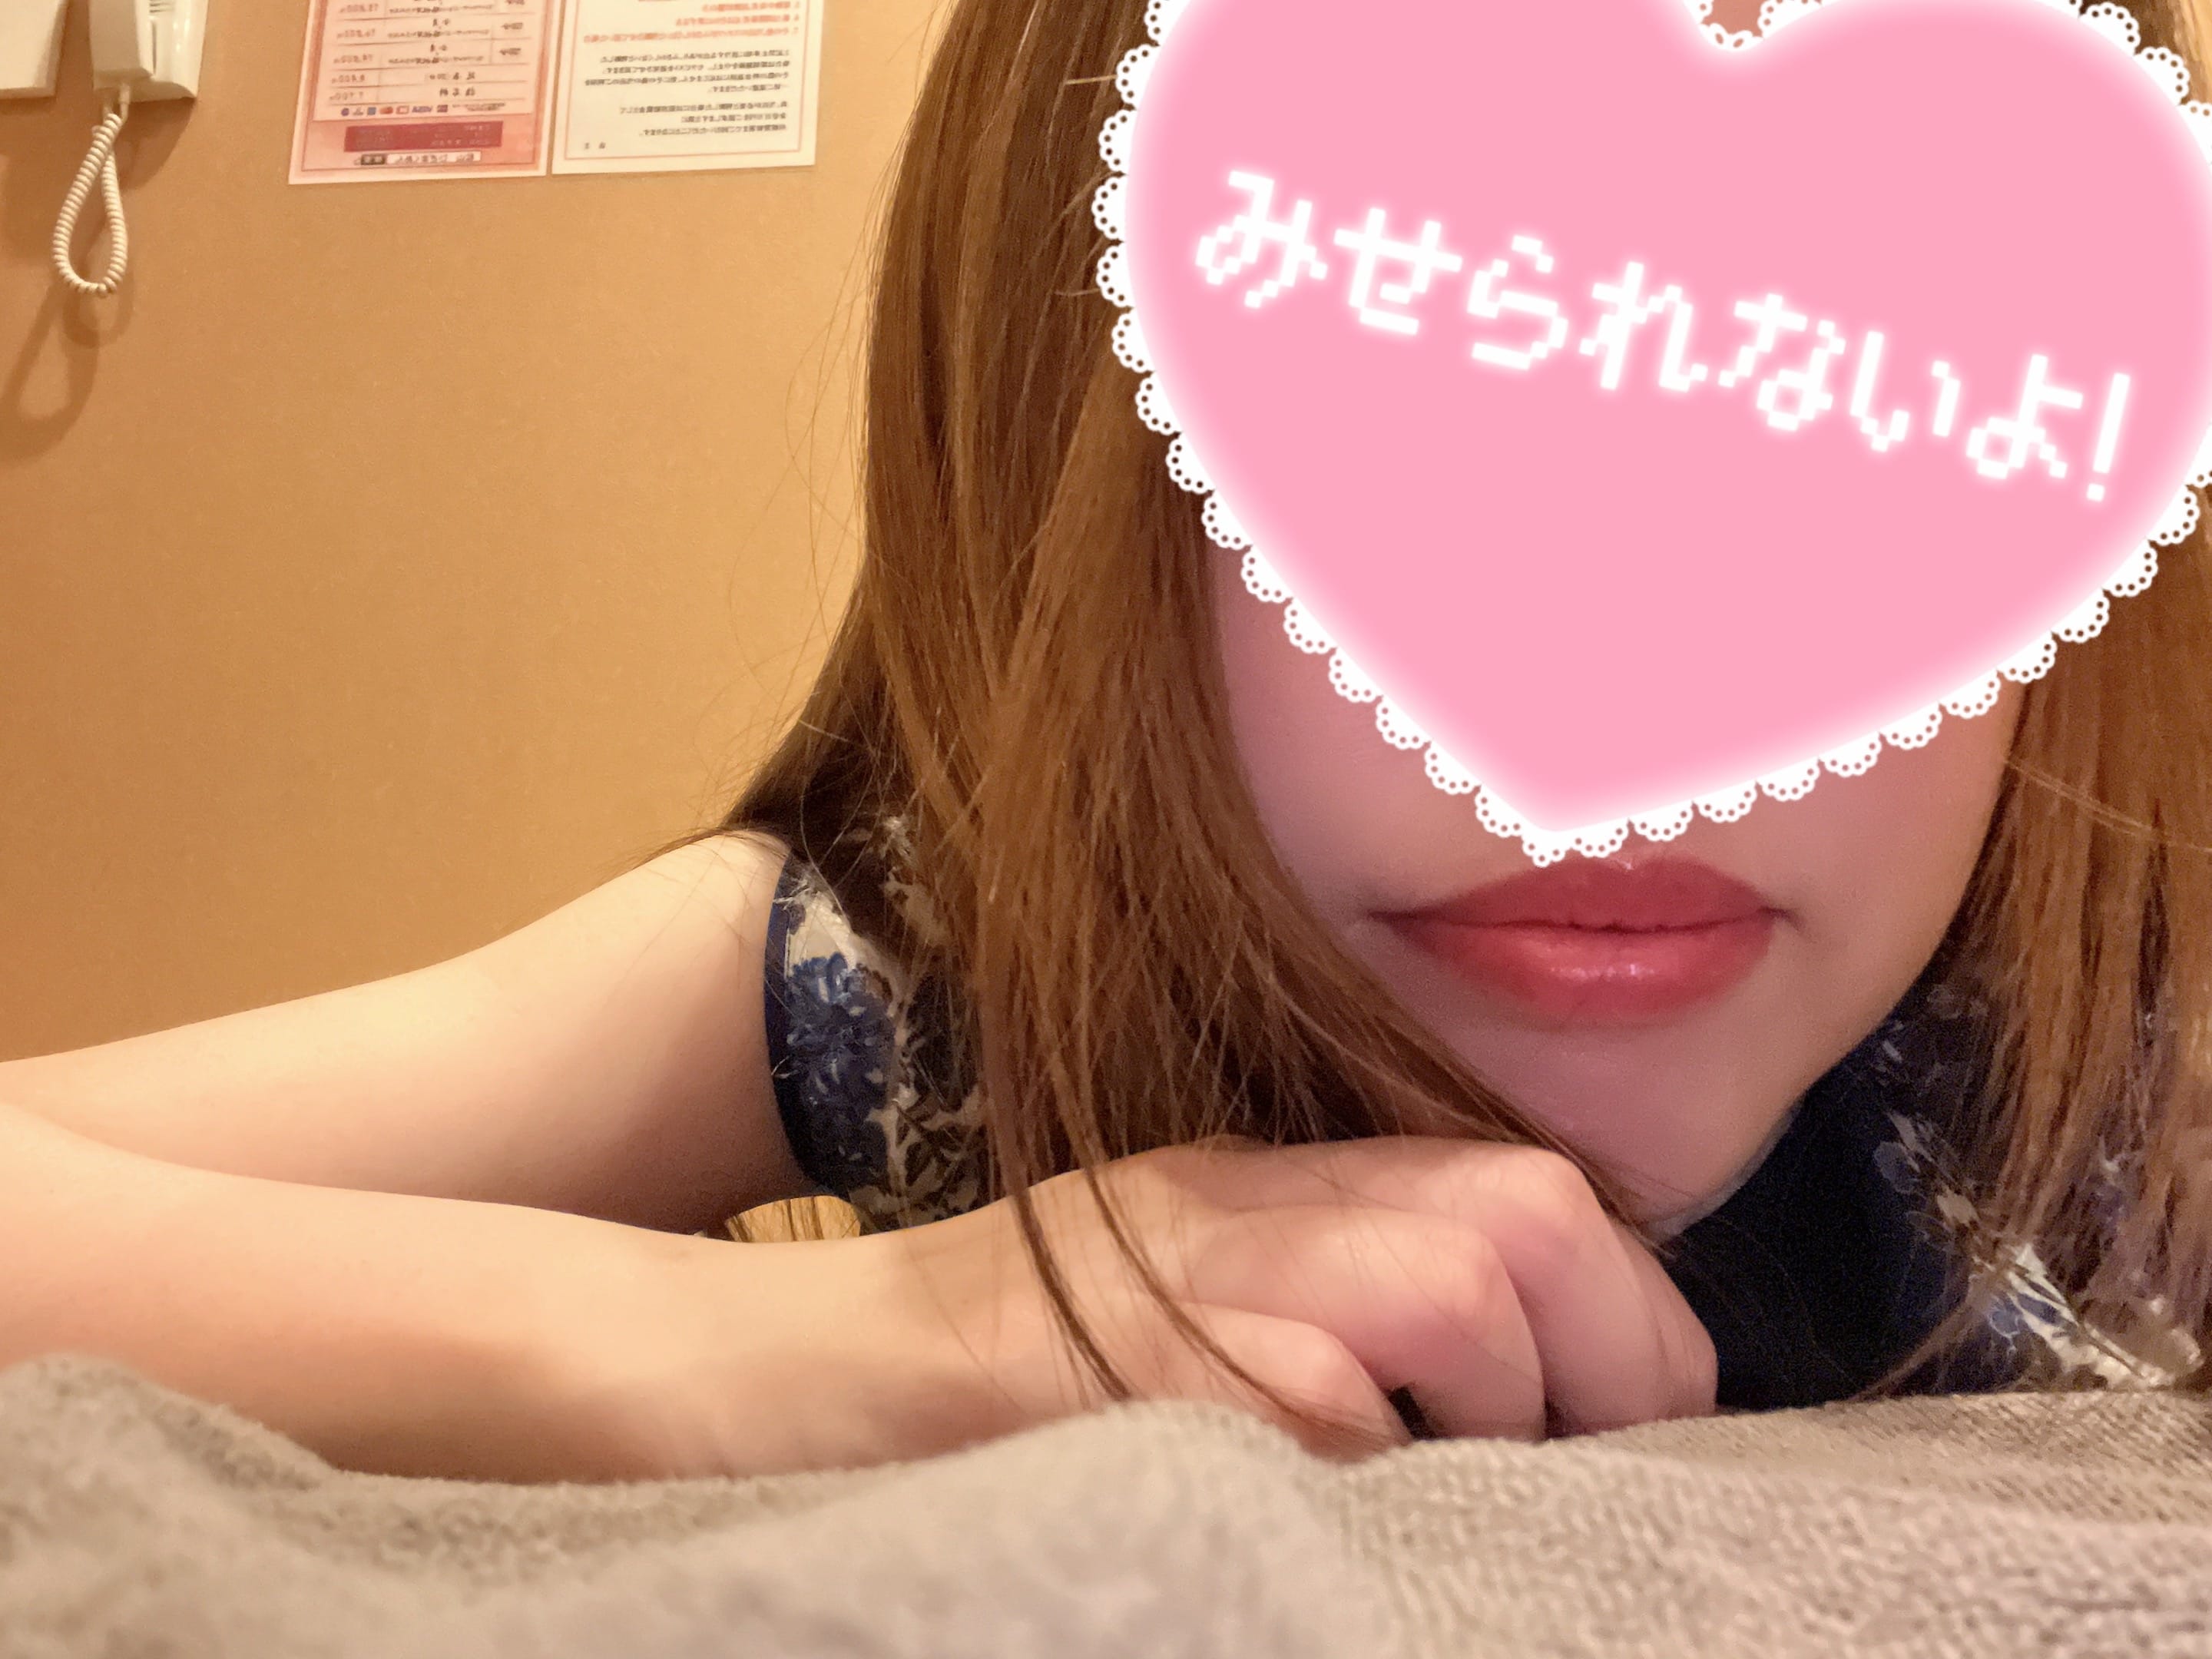 「thank you❤️」02/05(月) 20:54 | 北塚　まやの写メ日記